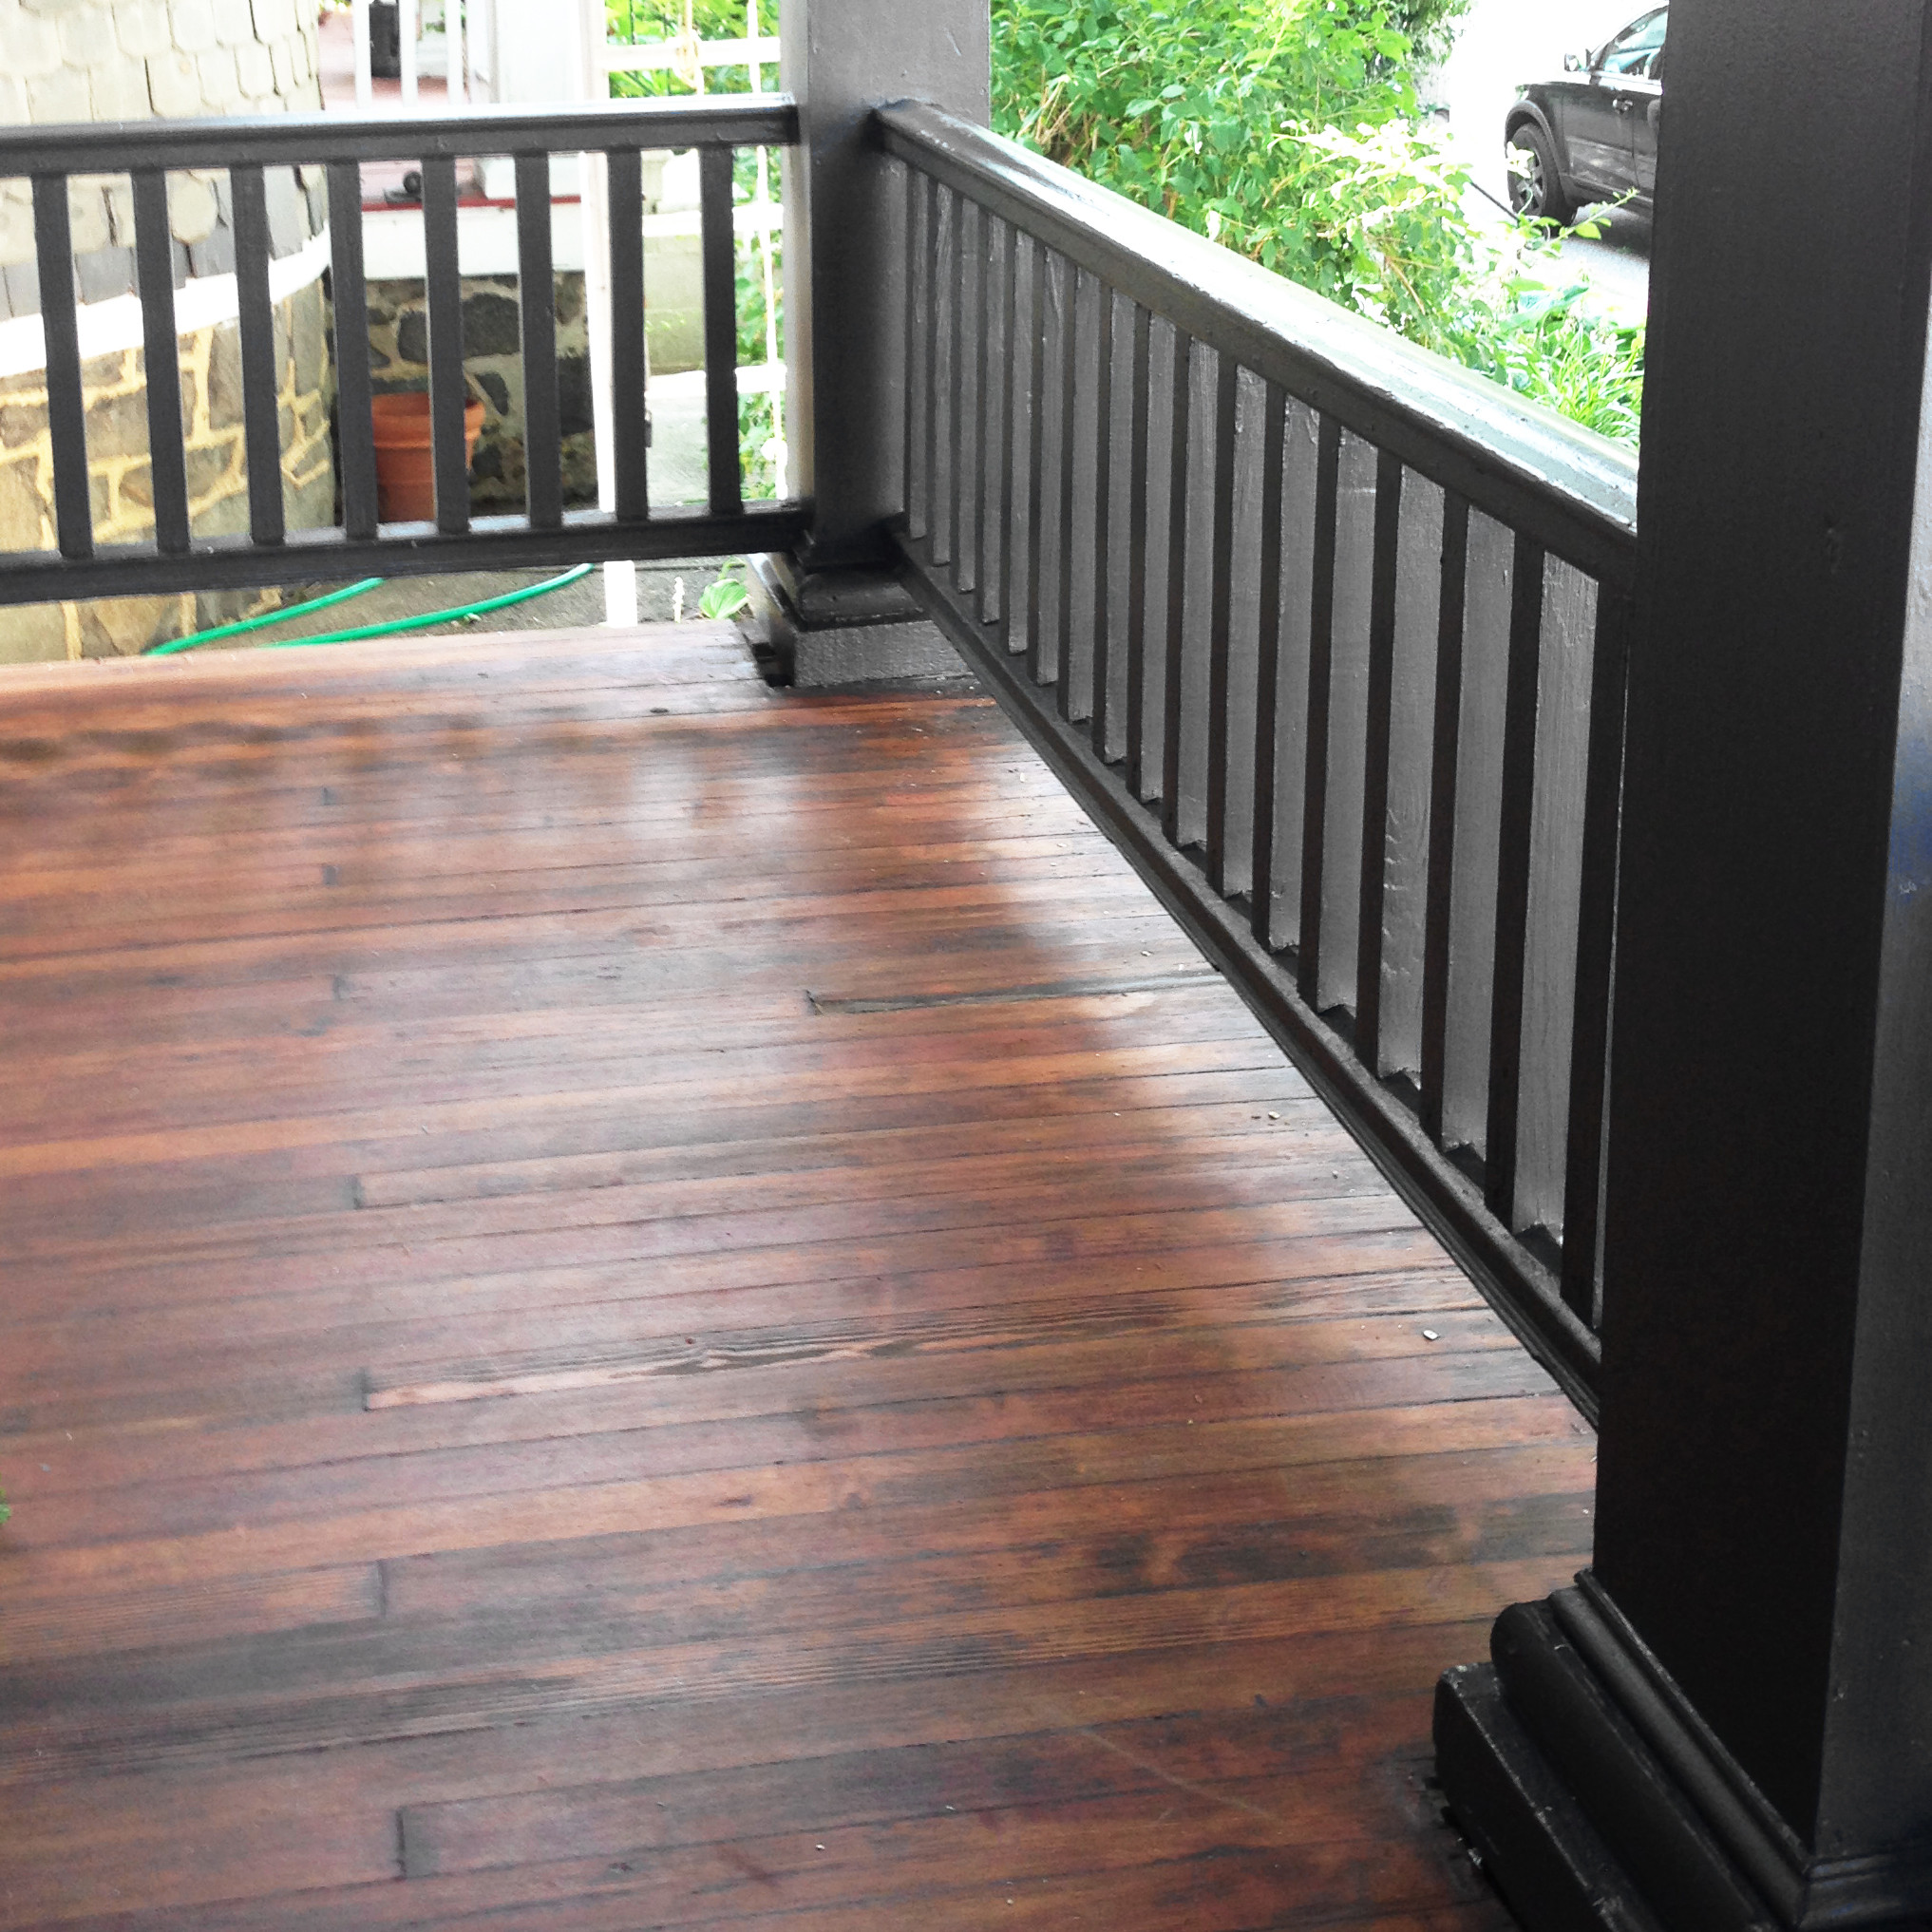 Remove Paint From Wooden Deck
 DIY Remove paint & Refinish front porch wood flooring